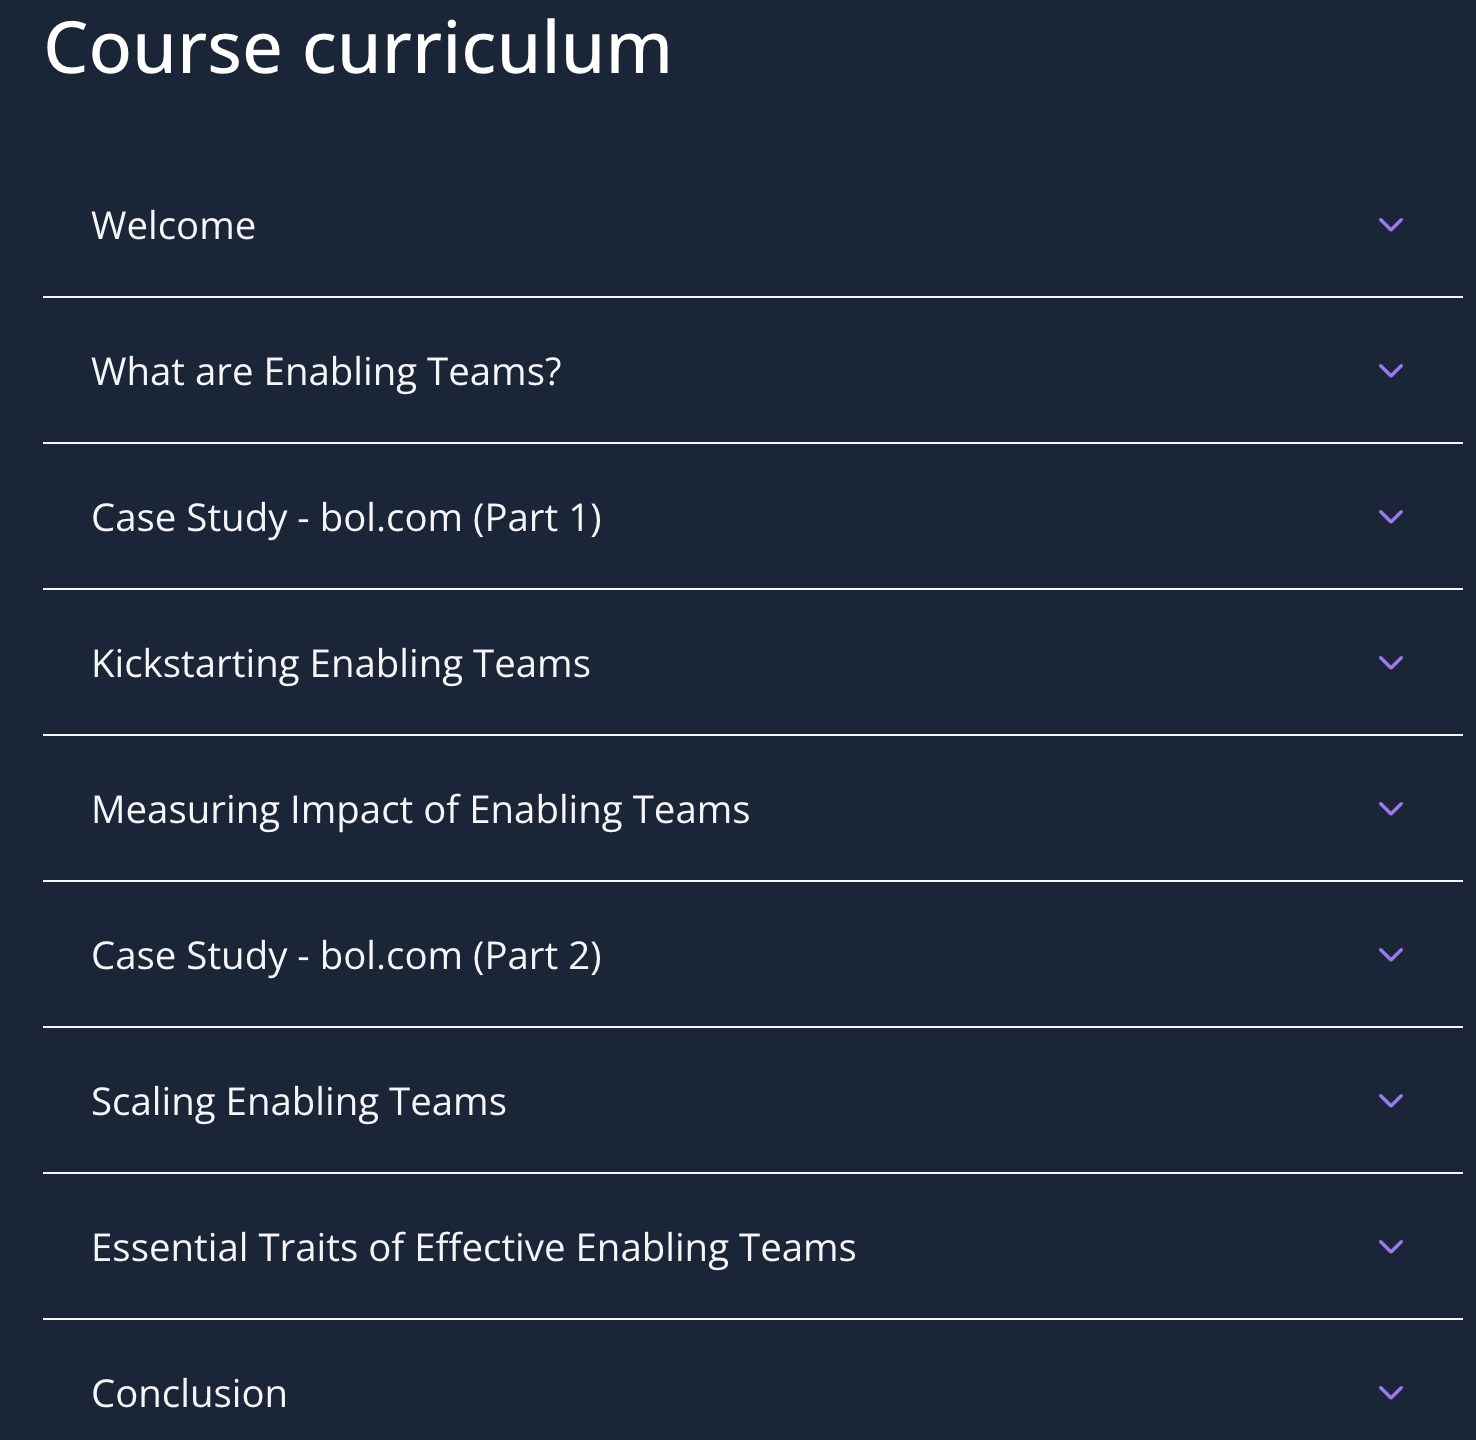 Effective Enabling Teams course curriculum